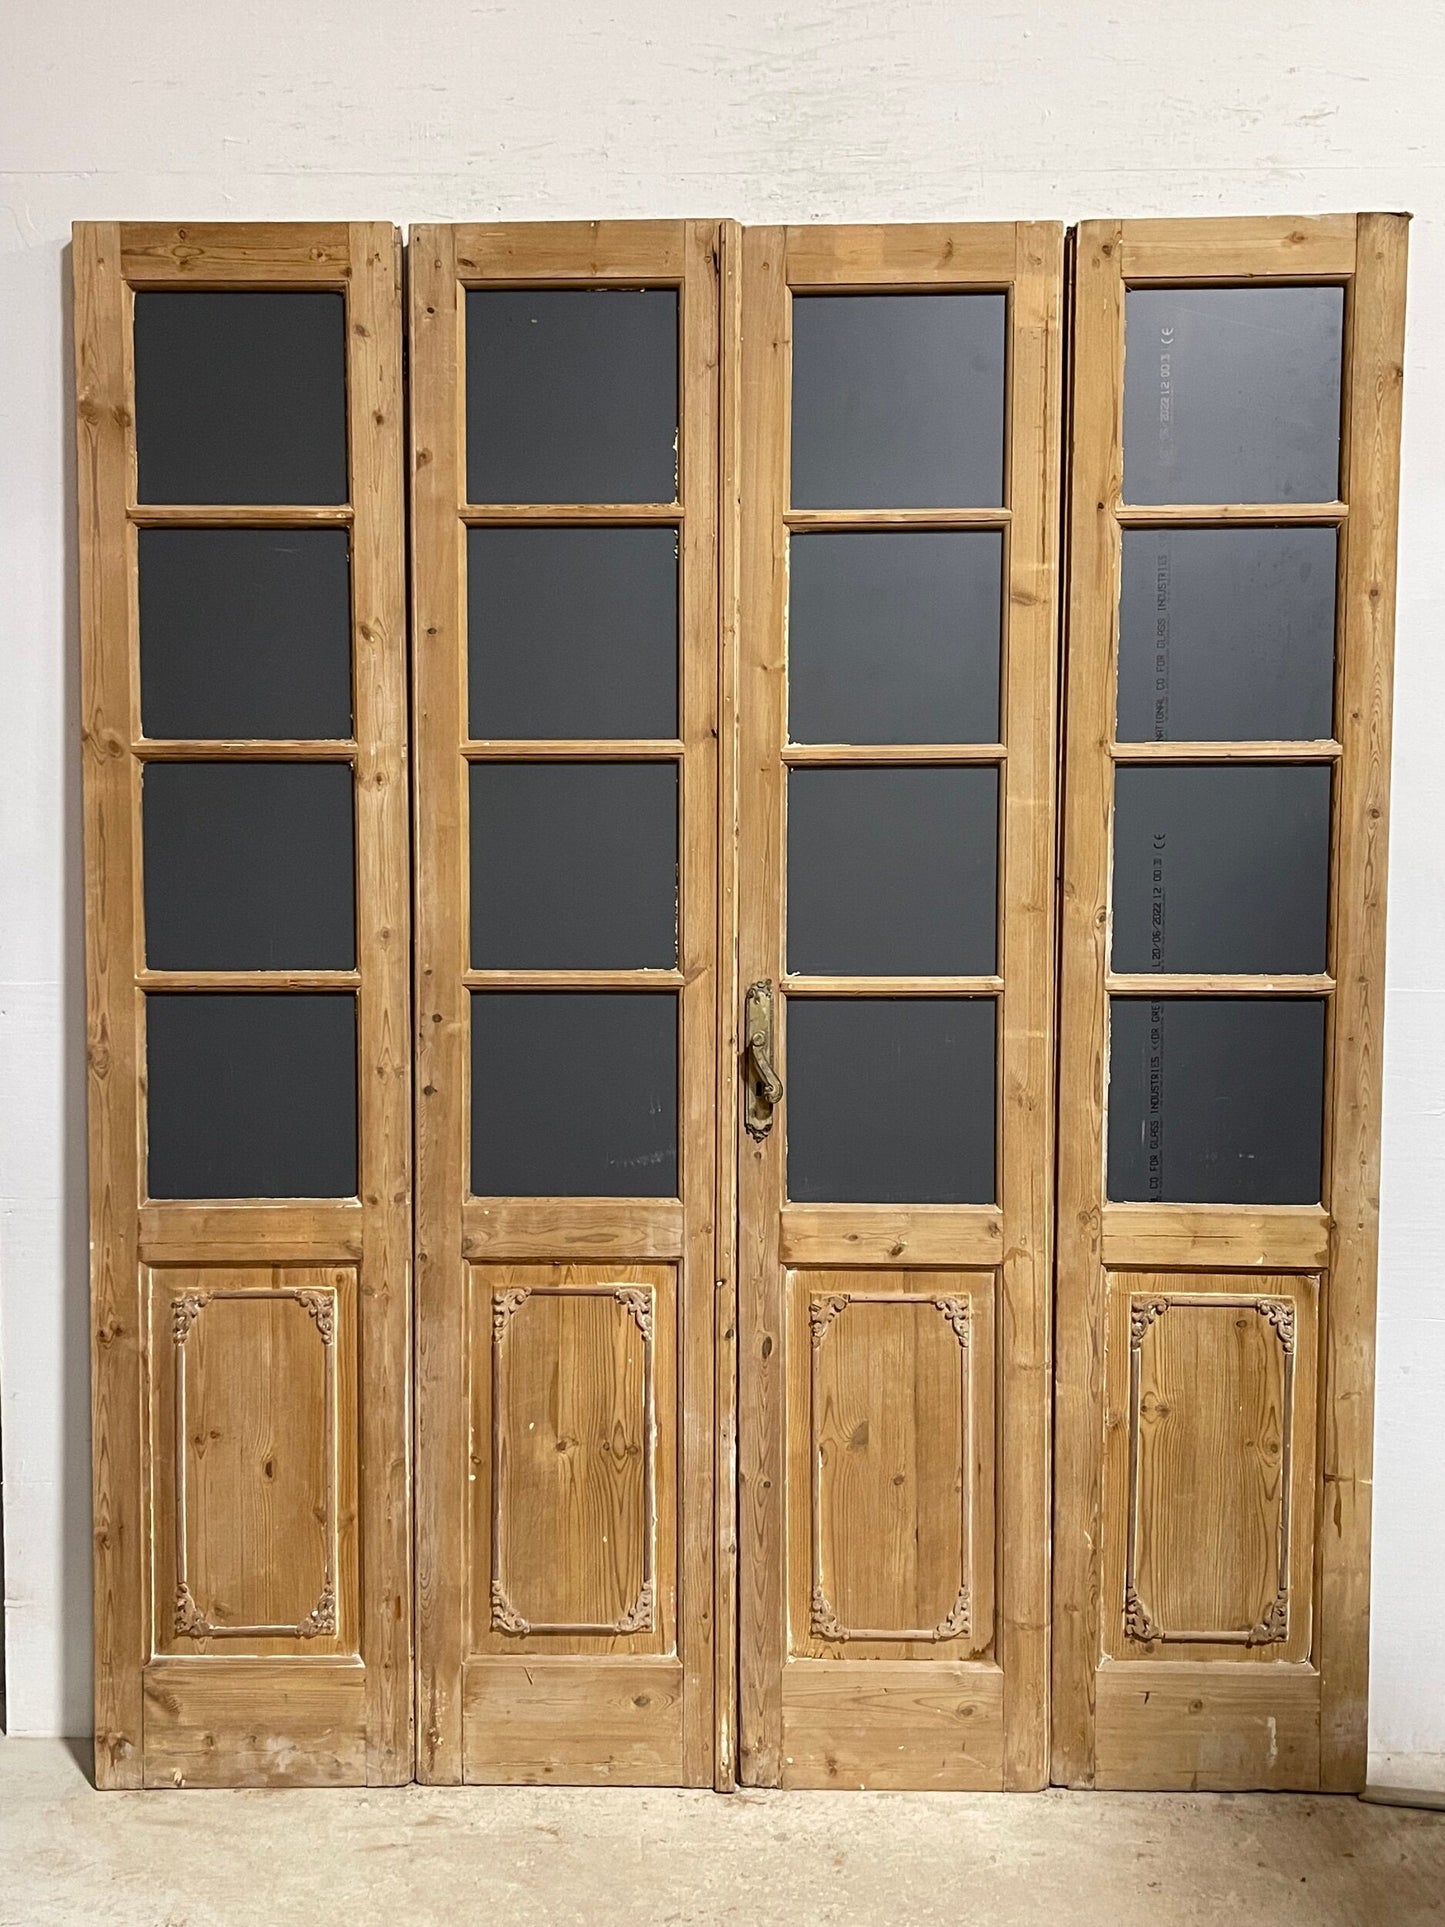 Antique French doors with mirror ( 92.5x76.25) H0238s